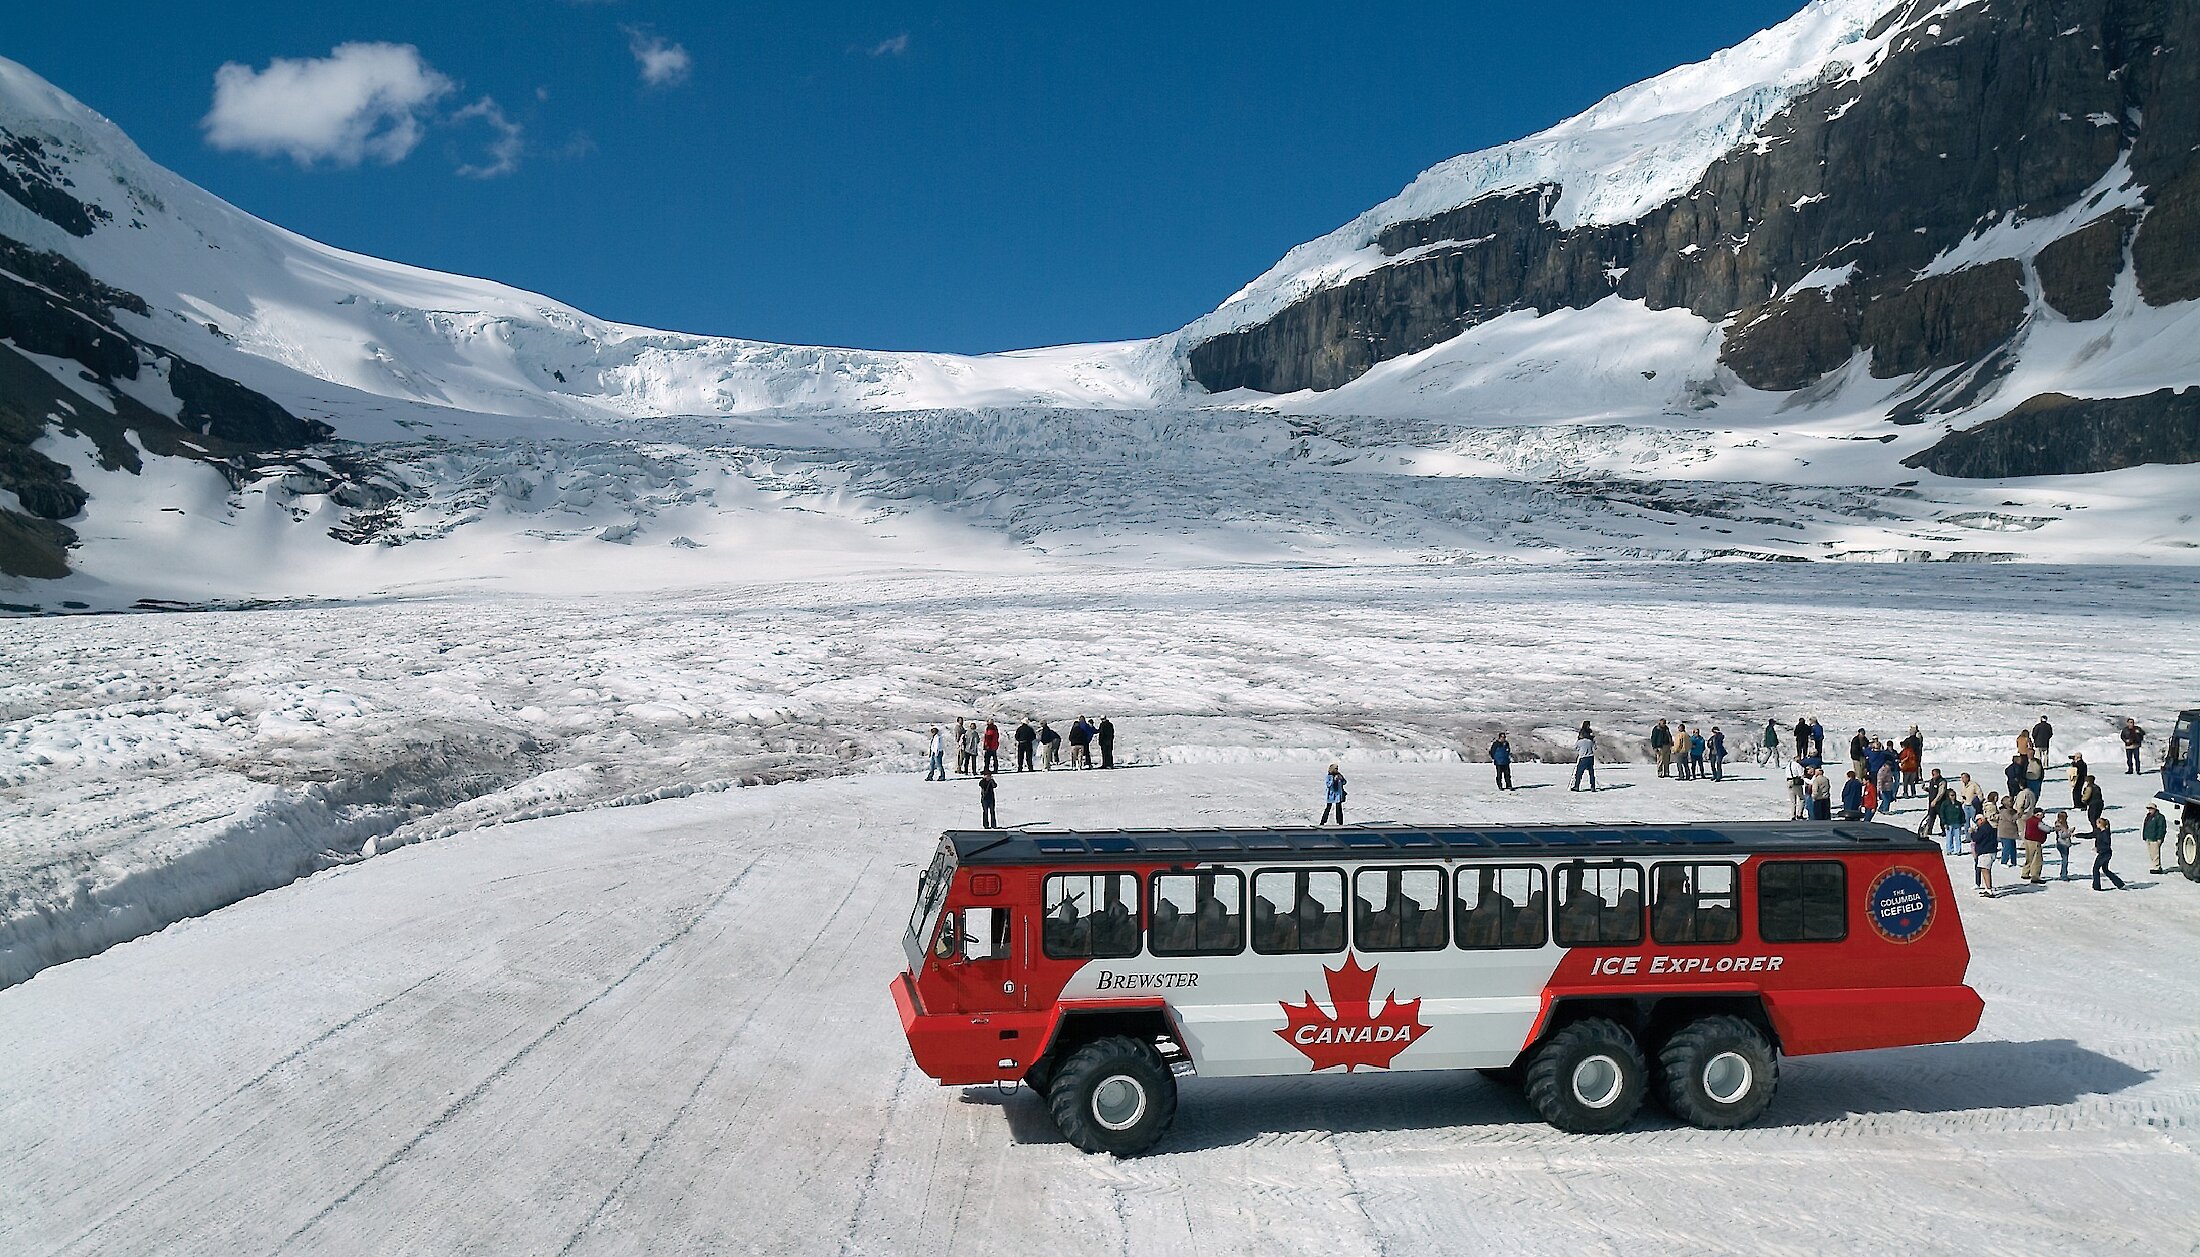 The Ice Explorer on the Columbia Icefield Glacier on a sunny bluebird day